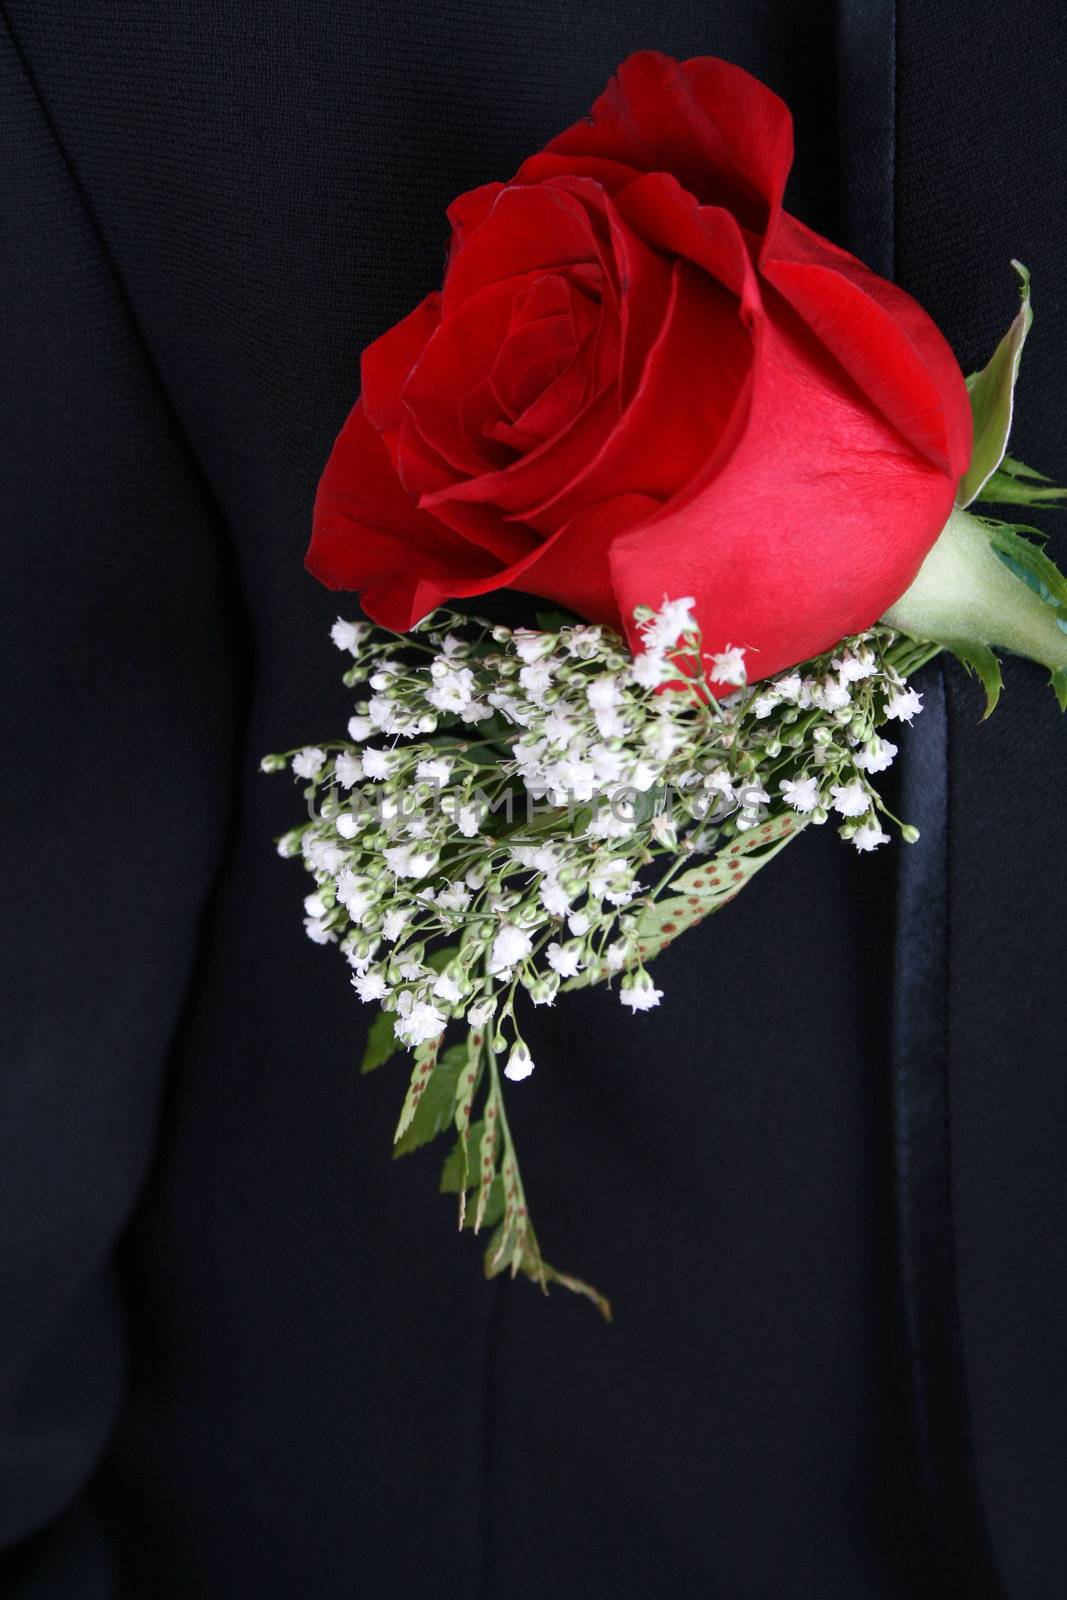 Red rose corsage against a dark suit